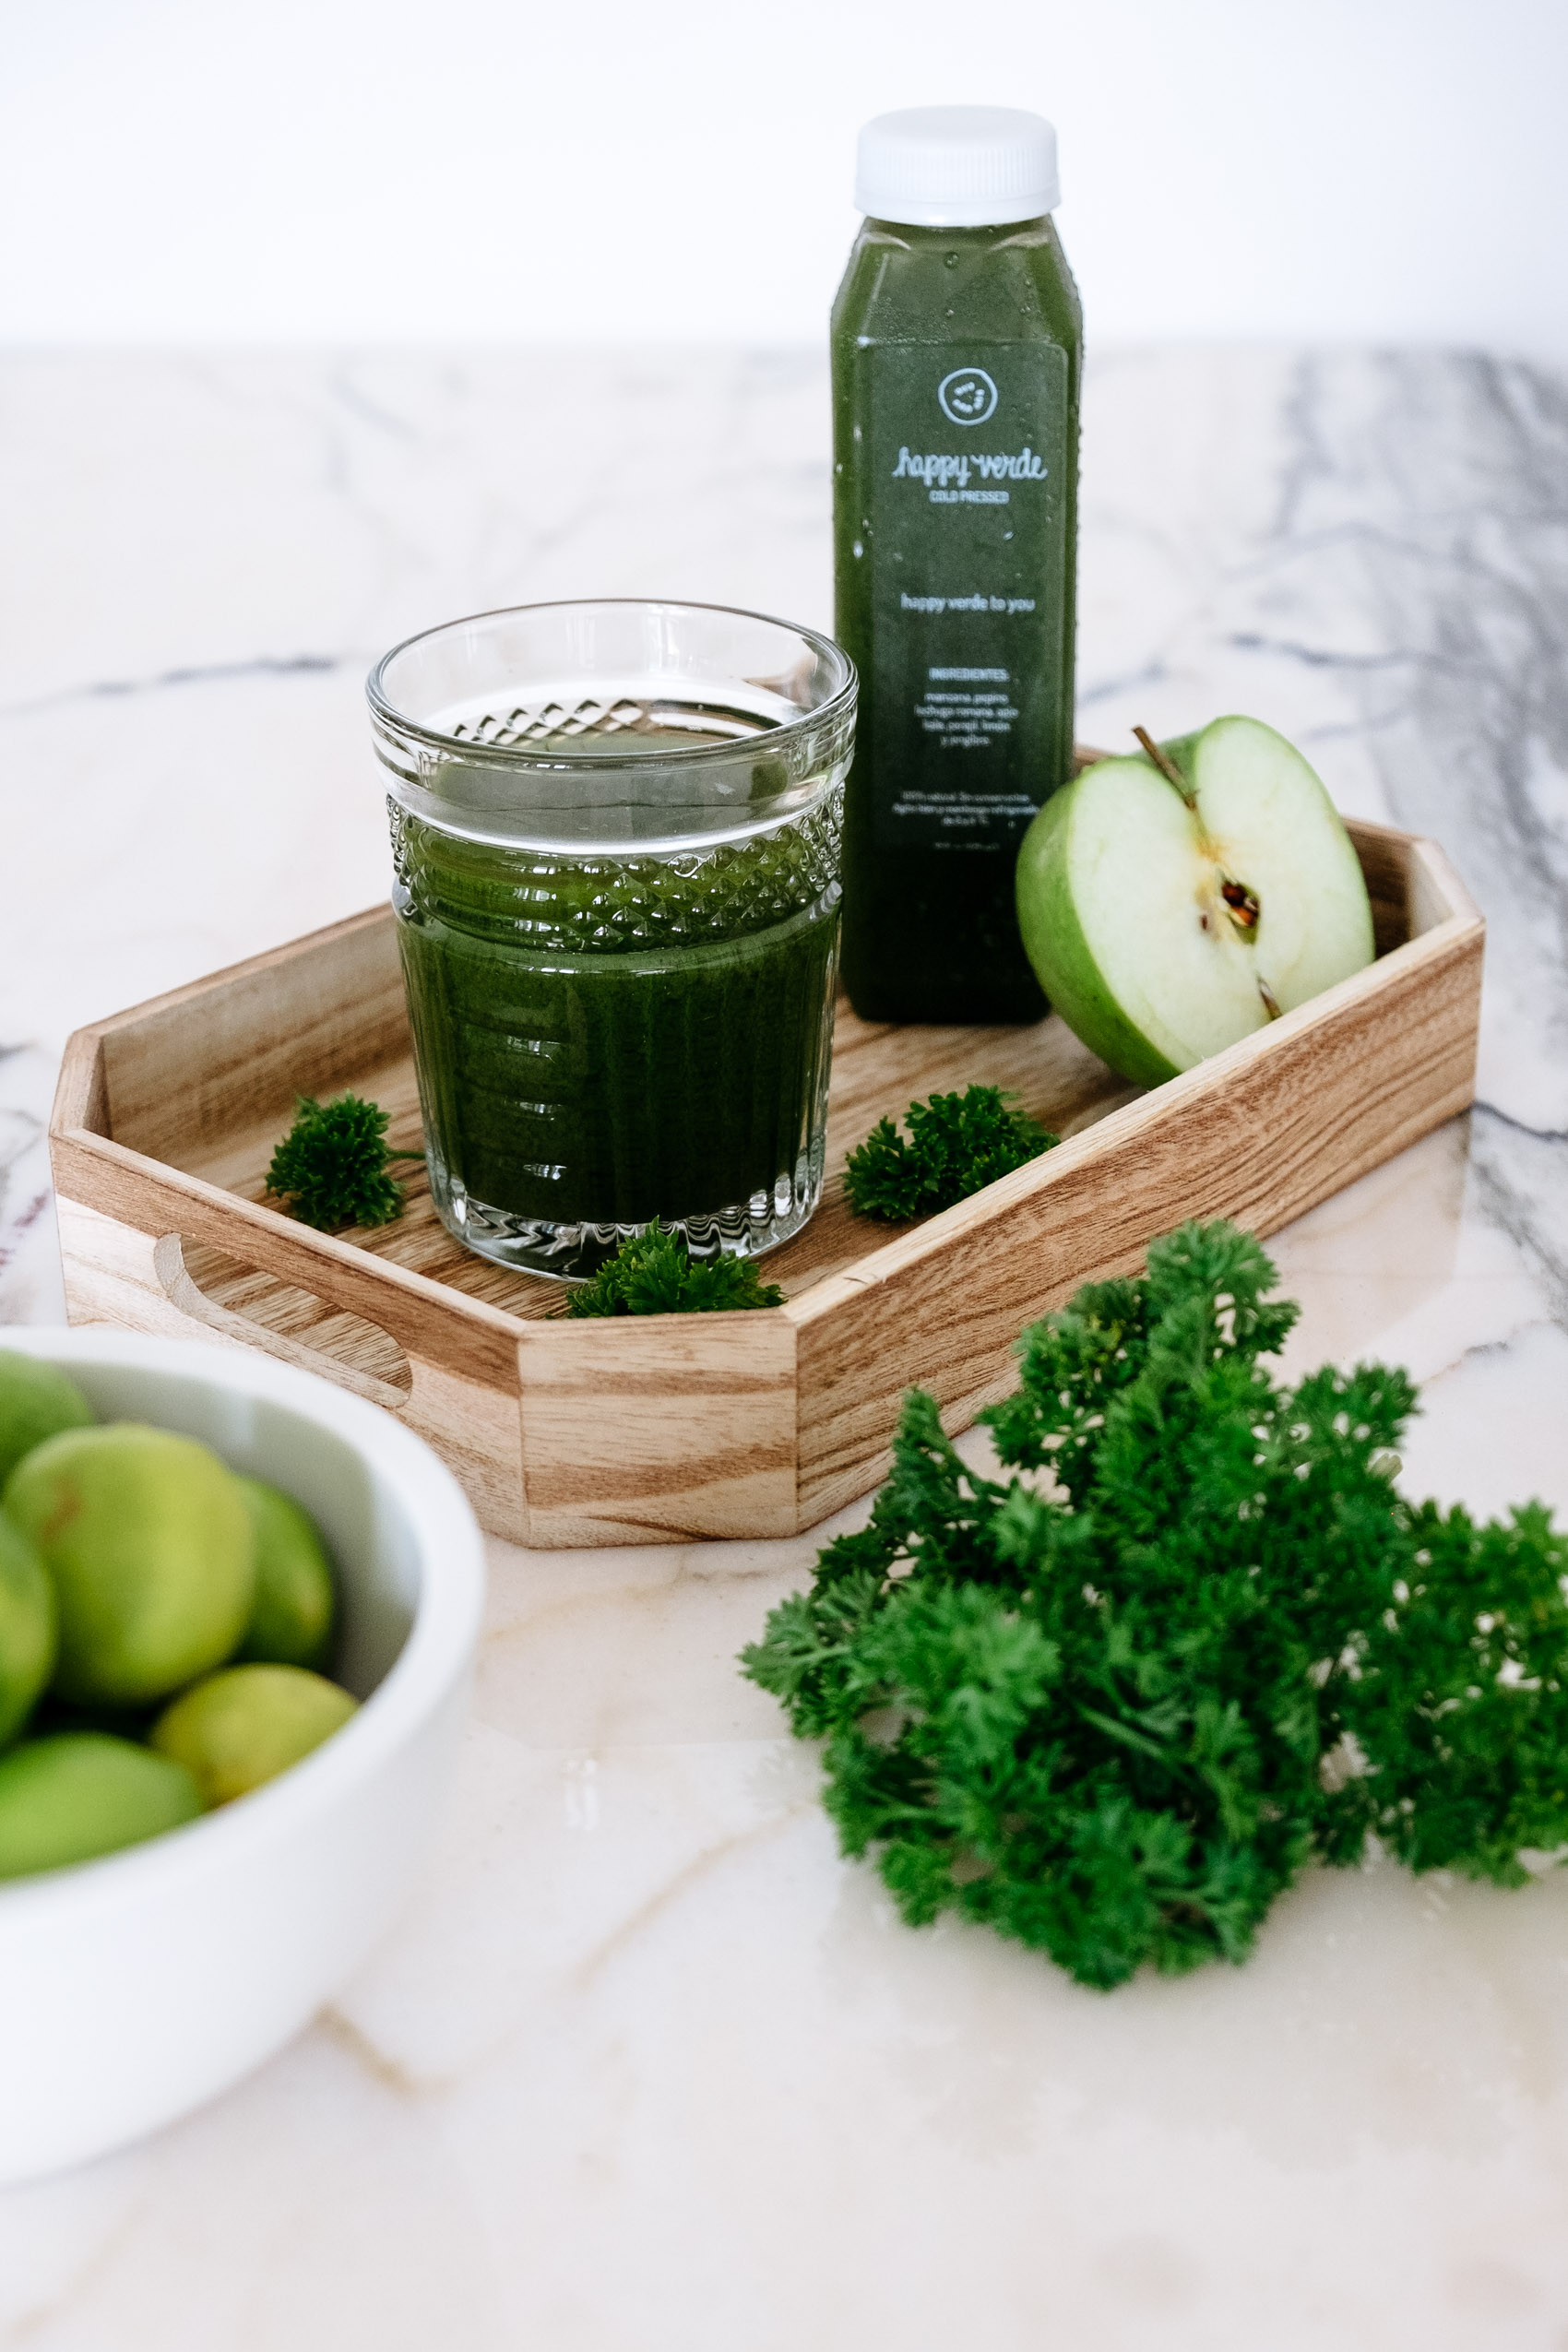 "Happy Verde To You" cold-pressed juice by Happy Verde with parsley, lemon, apples for anti-ageing results.